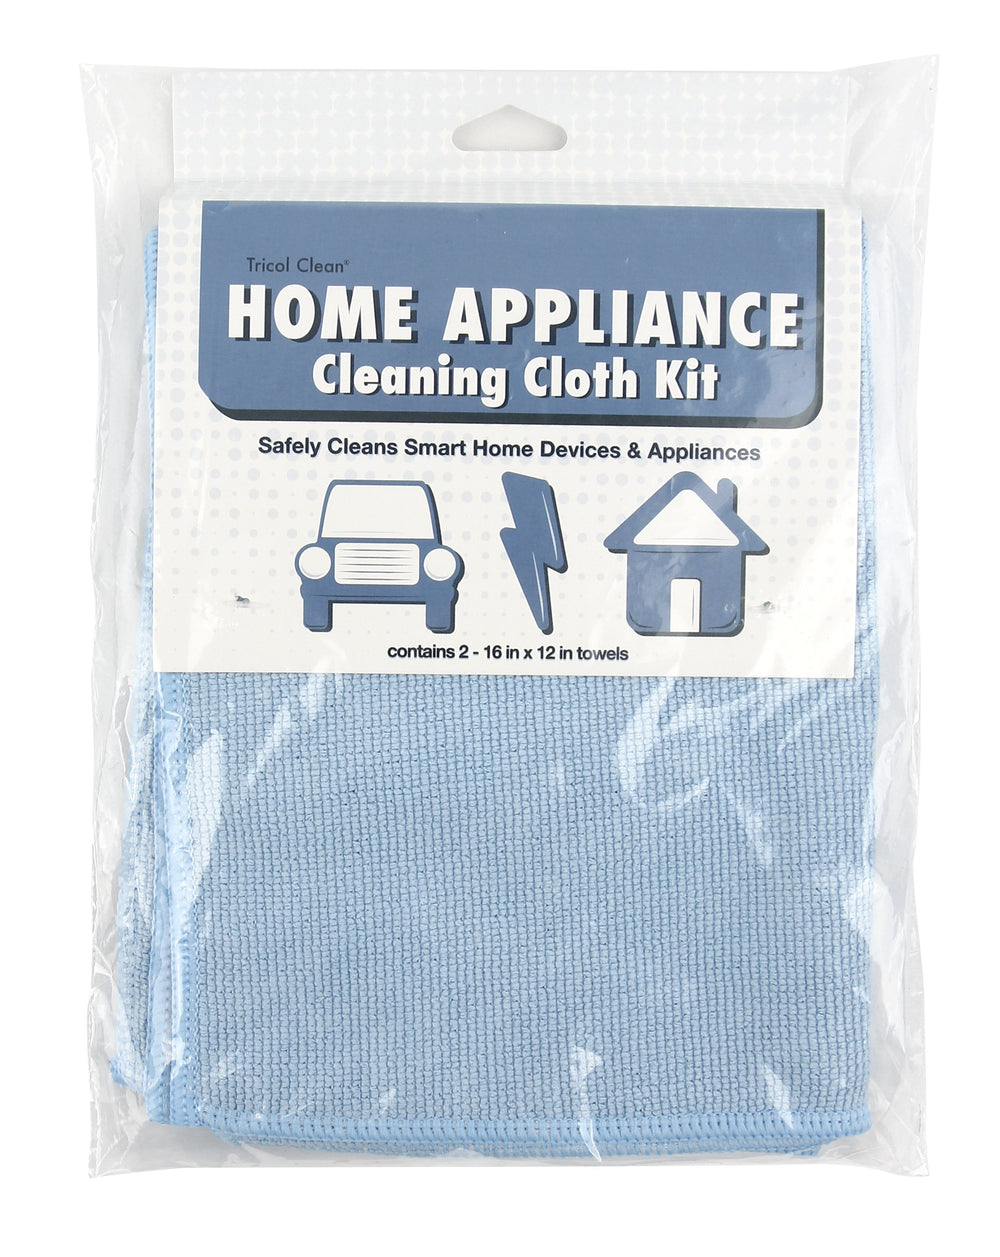 Stainless Steel Cleaning Kit, 2 Pack for home appliances